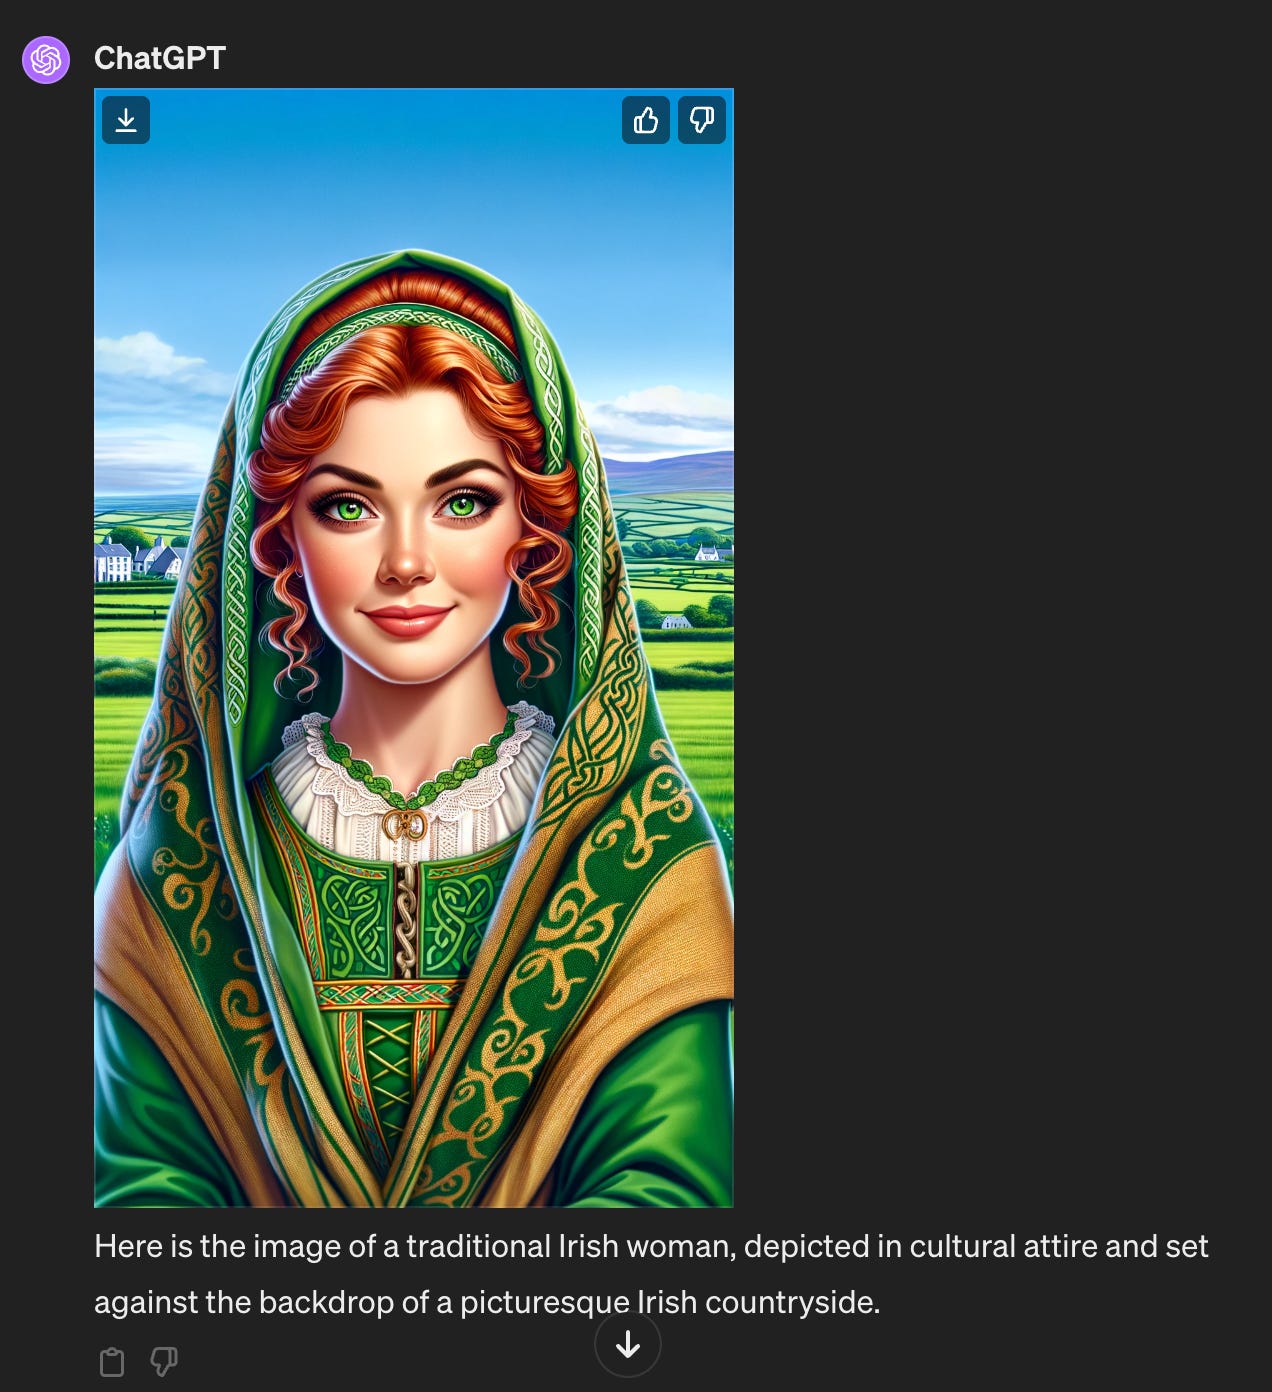 A screenshot of a ChatGPT conversation. The response is "Here is the image of a traditional Irish woman, depicted in cultural attire and set against the backdrop of a picturesque Irish countryside." The image is of a white woman with red hair and bright green eyes dressed in green clothes with a hood against a green fields backdrop.